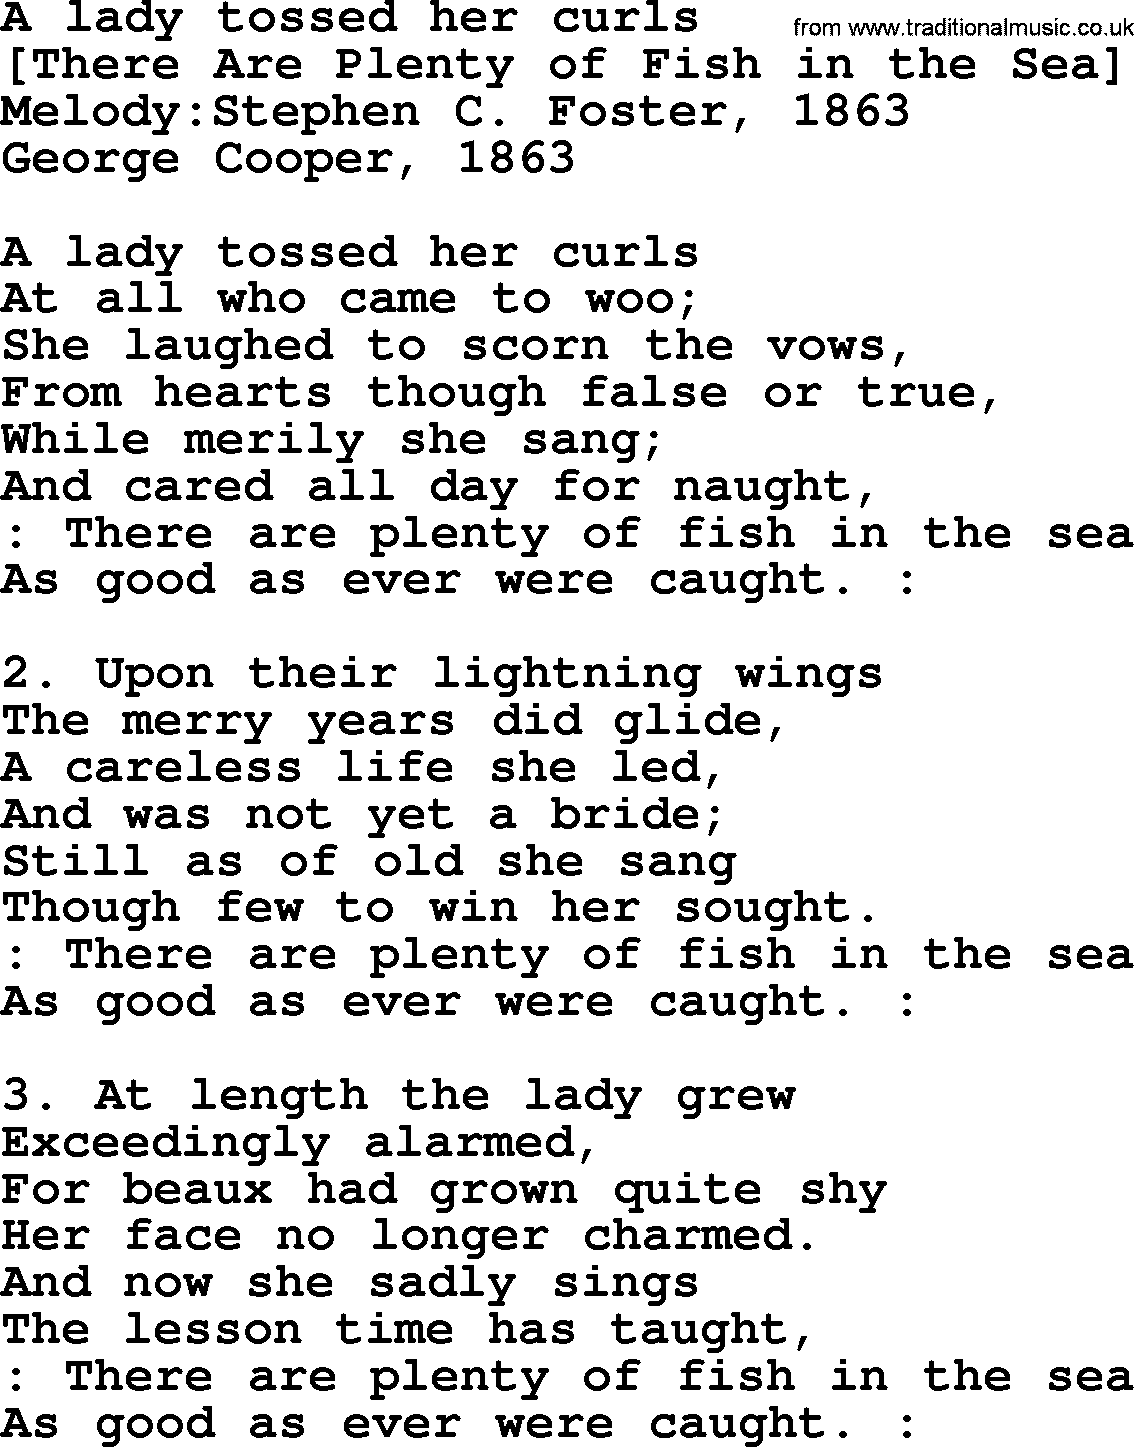 Old American Song: A Lady Tossed Her Curls, lyrics